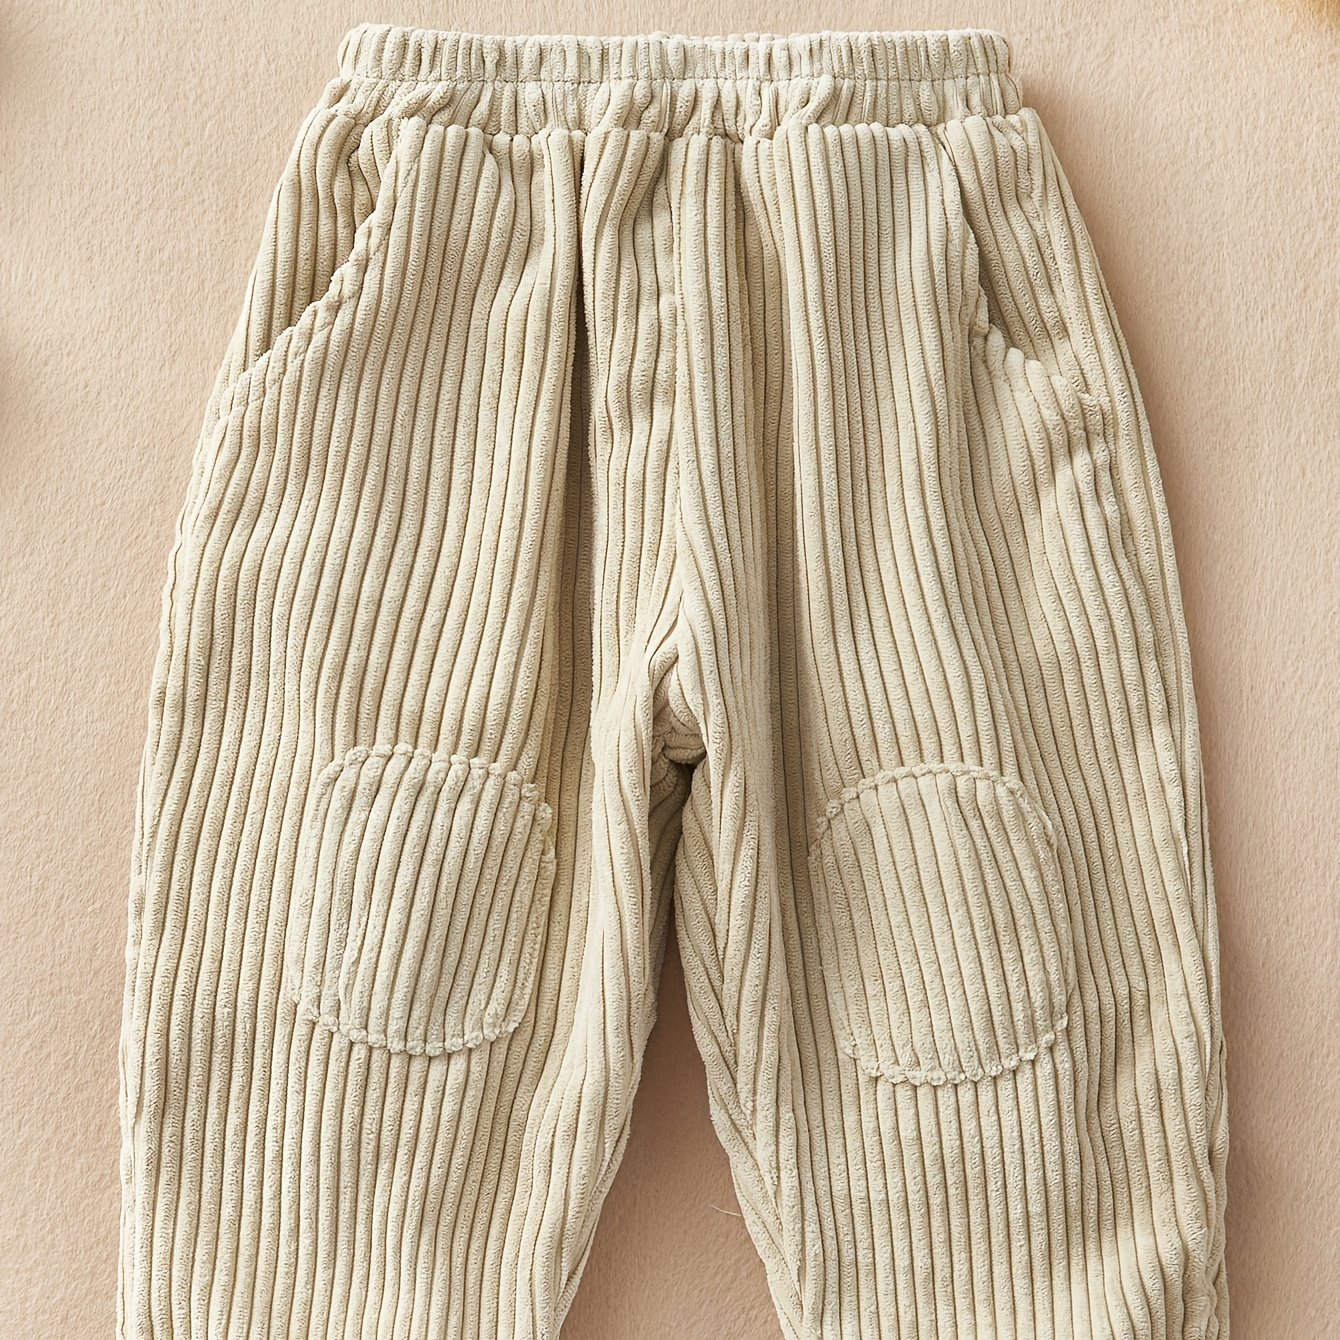 

Baby Boys, 100% Pure Cotton, All-match Corduroy Pants, Autumn And Winter Stylish Cotton Patched Casual Carrot Shape Pants